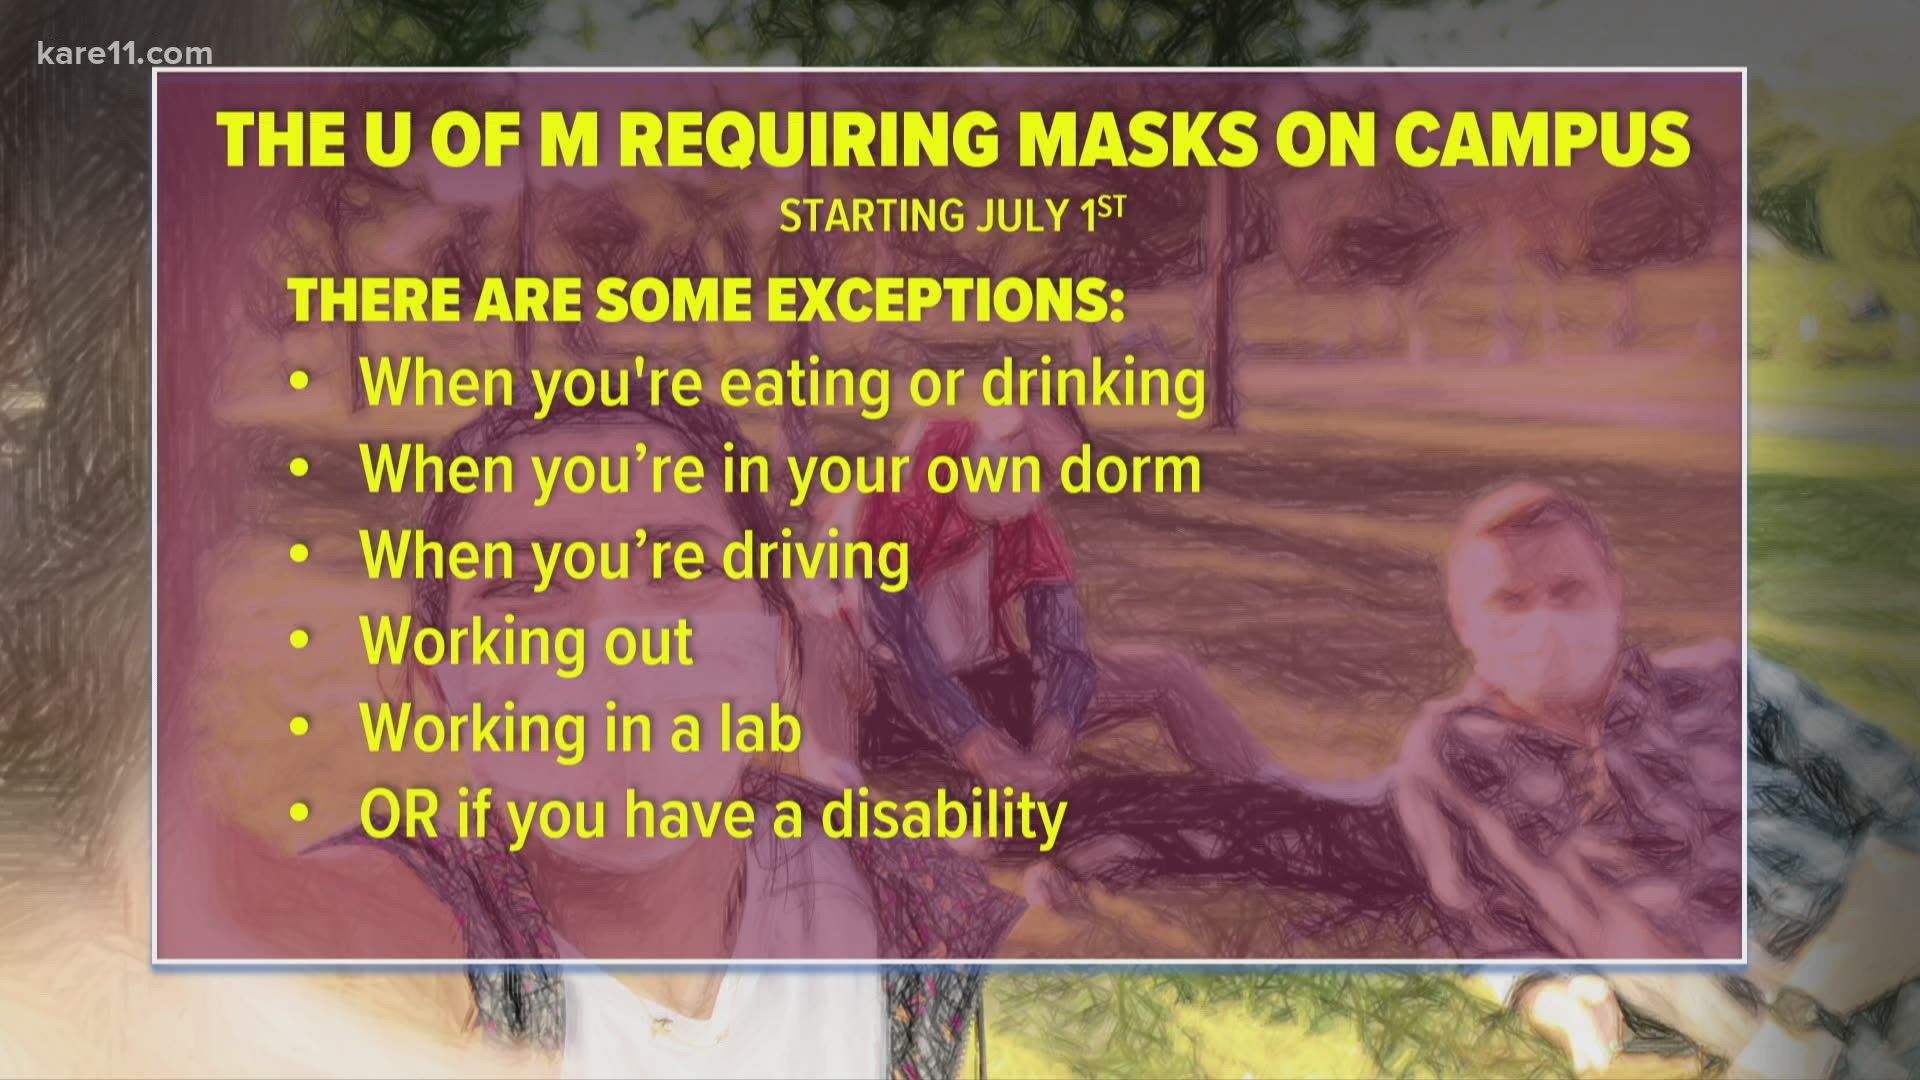 The U of M will require all students and staff returning this fall to wear face masks in public indoor spaces, and several communities may follow suit.